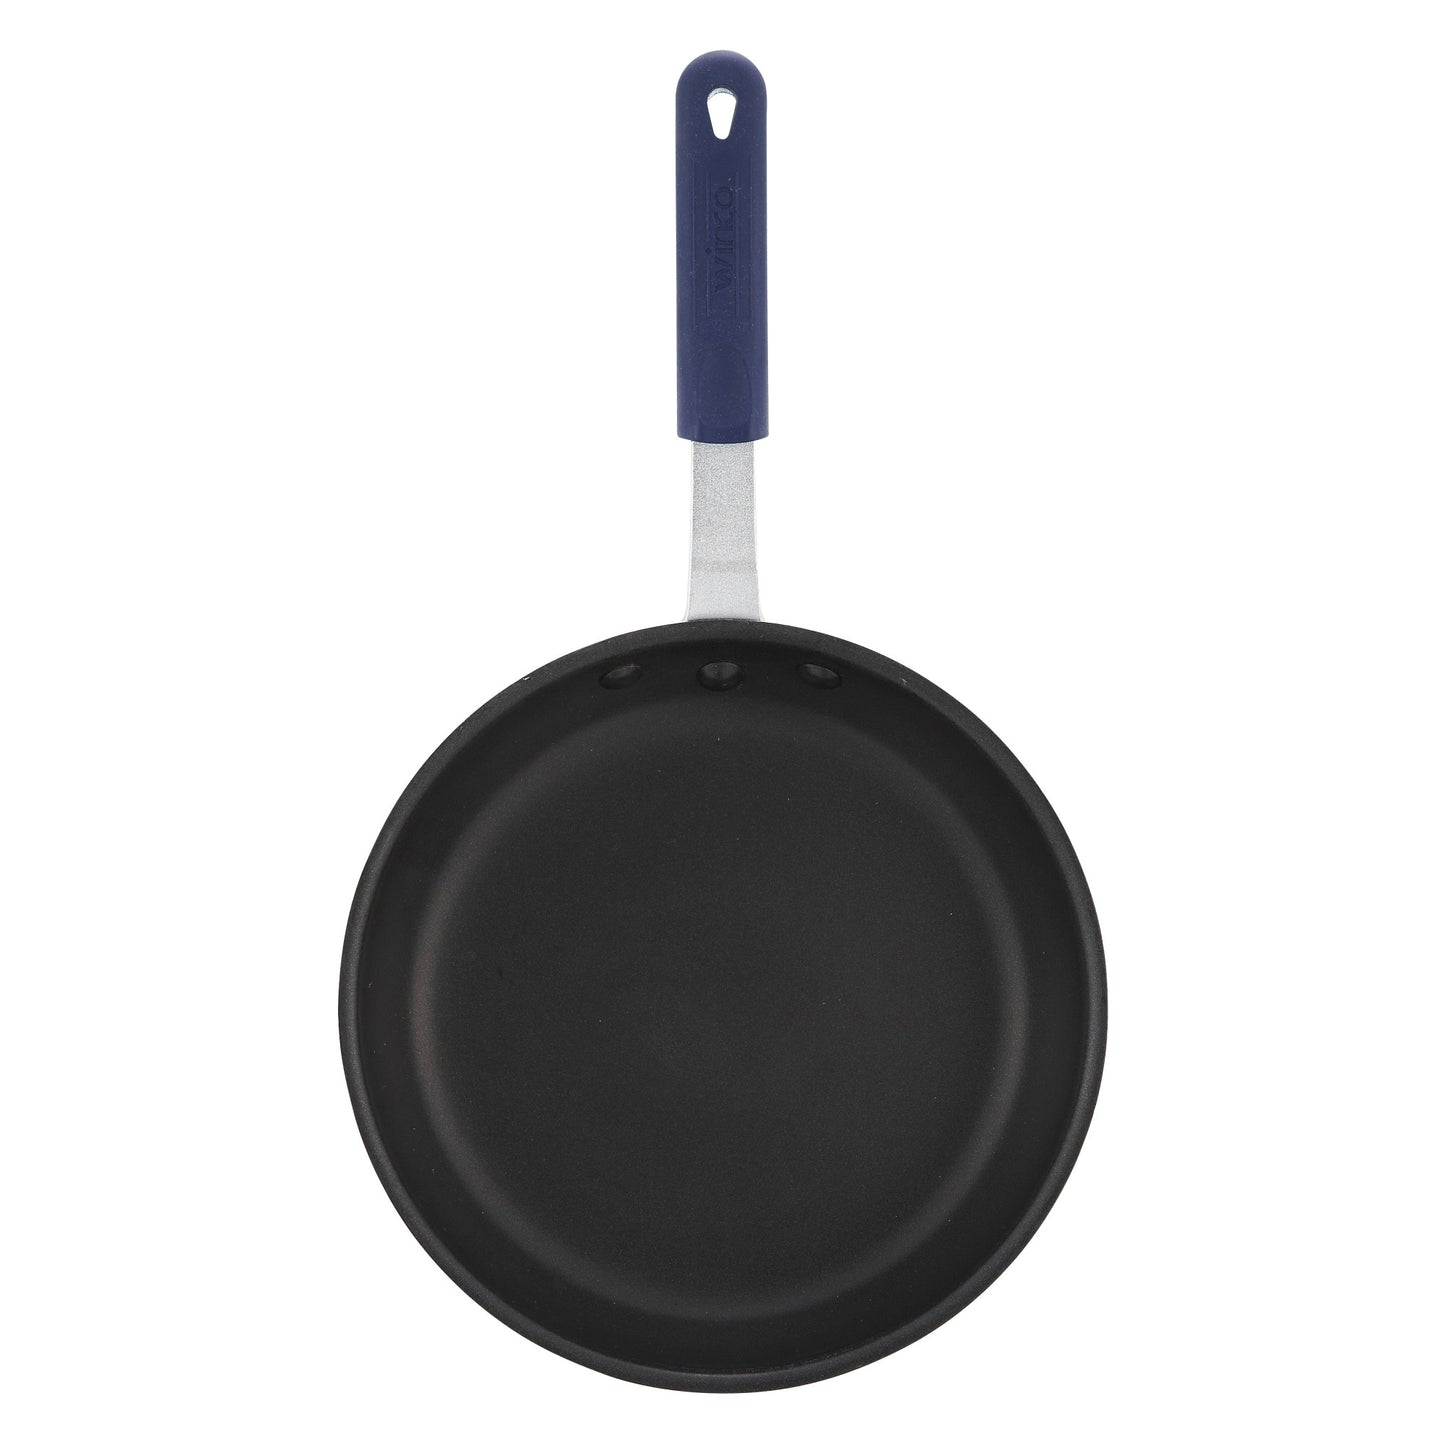 AFP-14XC-H - Aluminum Fry Pan, Gladiator, Excalibur Non-Stick - 14" Dia with Silicone Sleeve